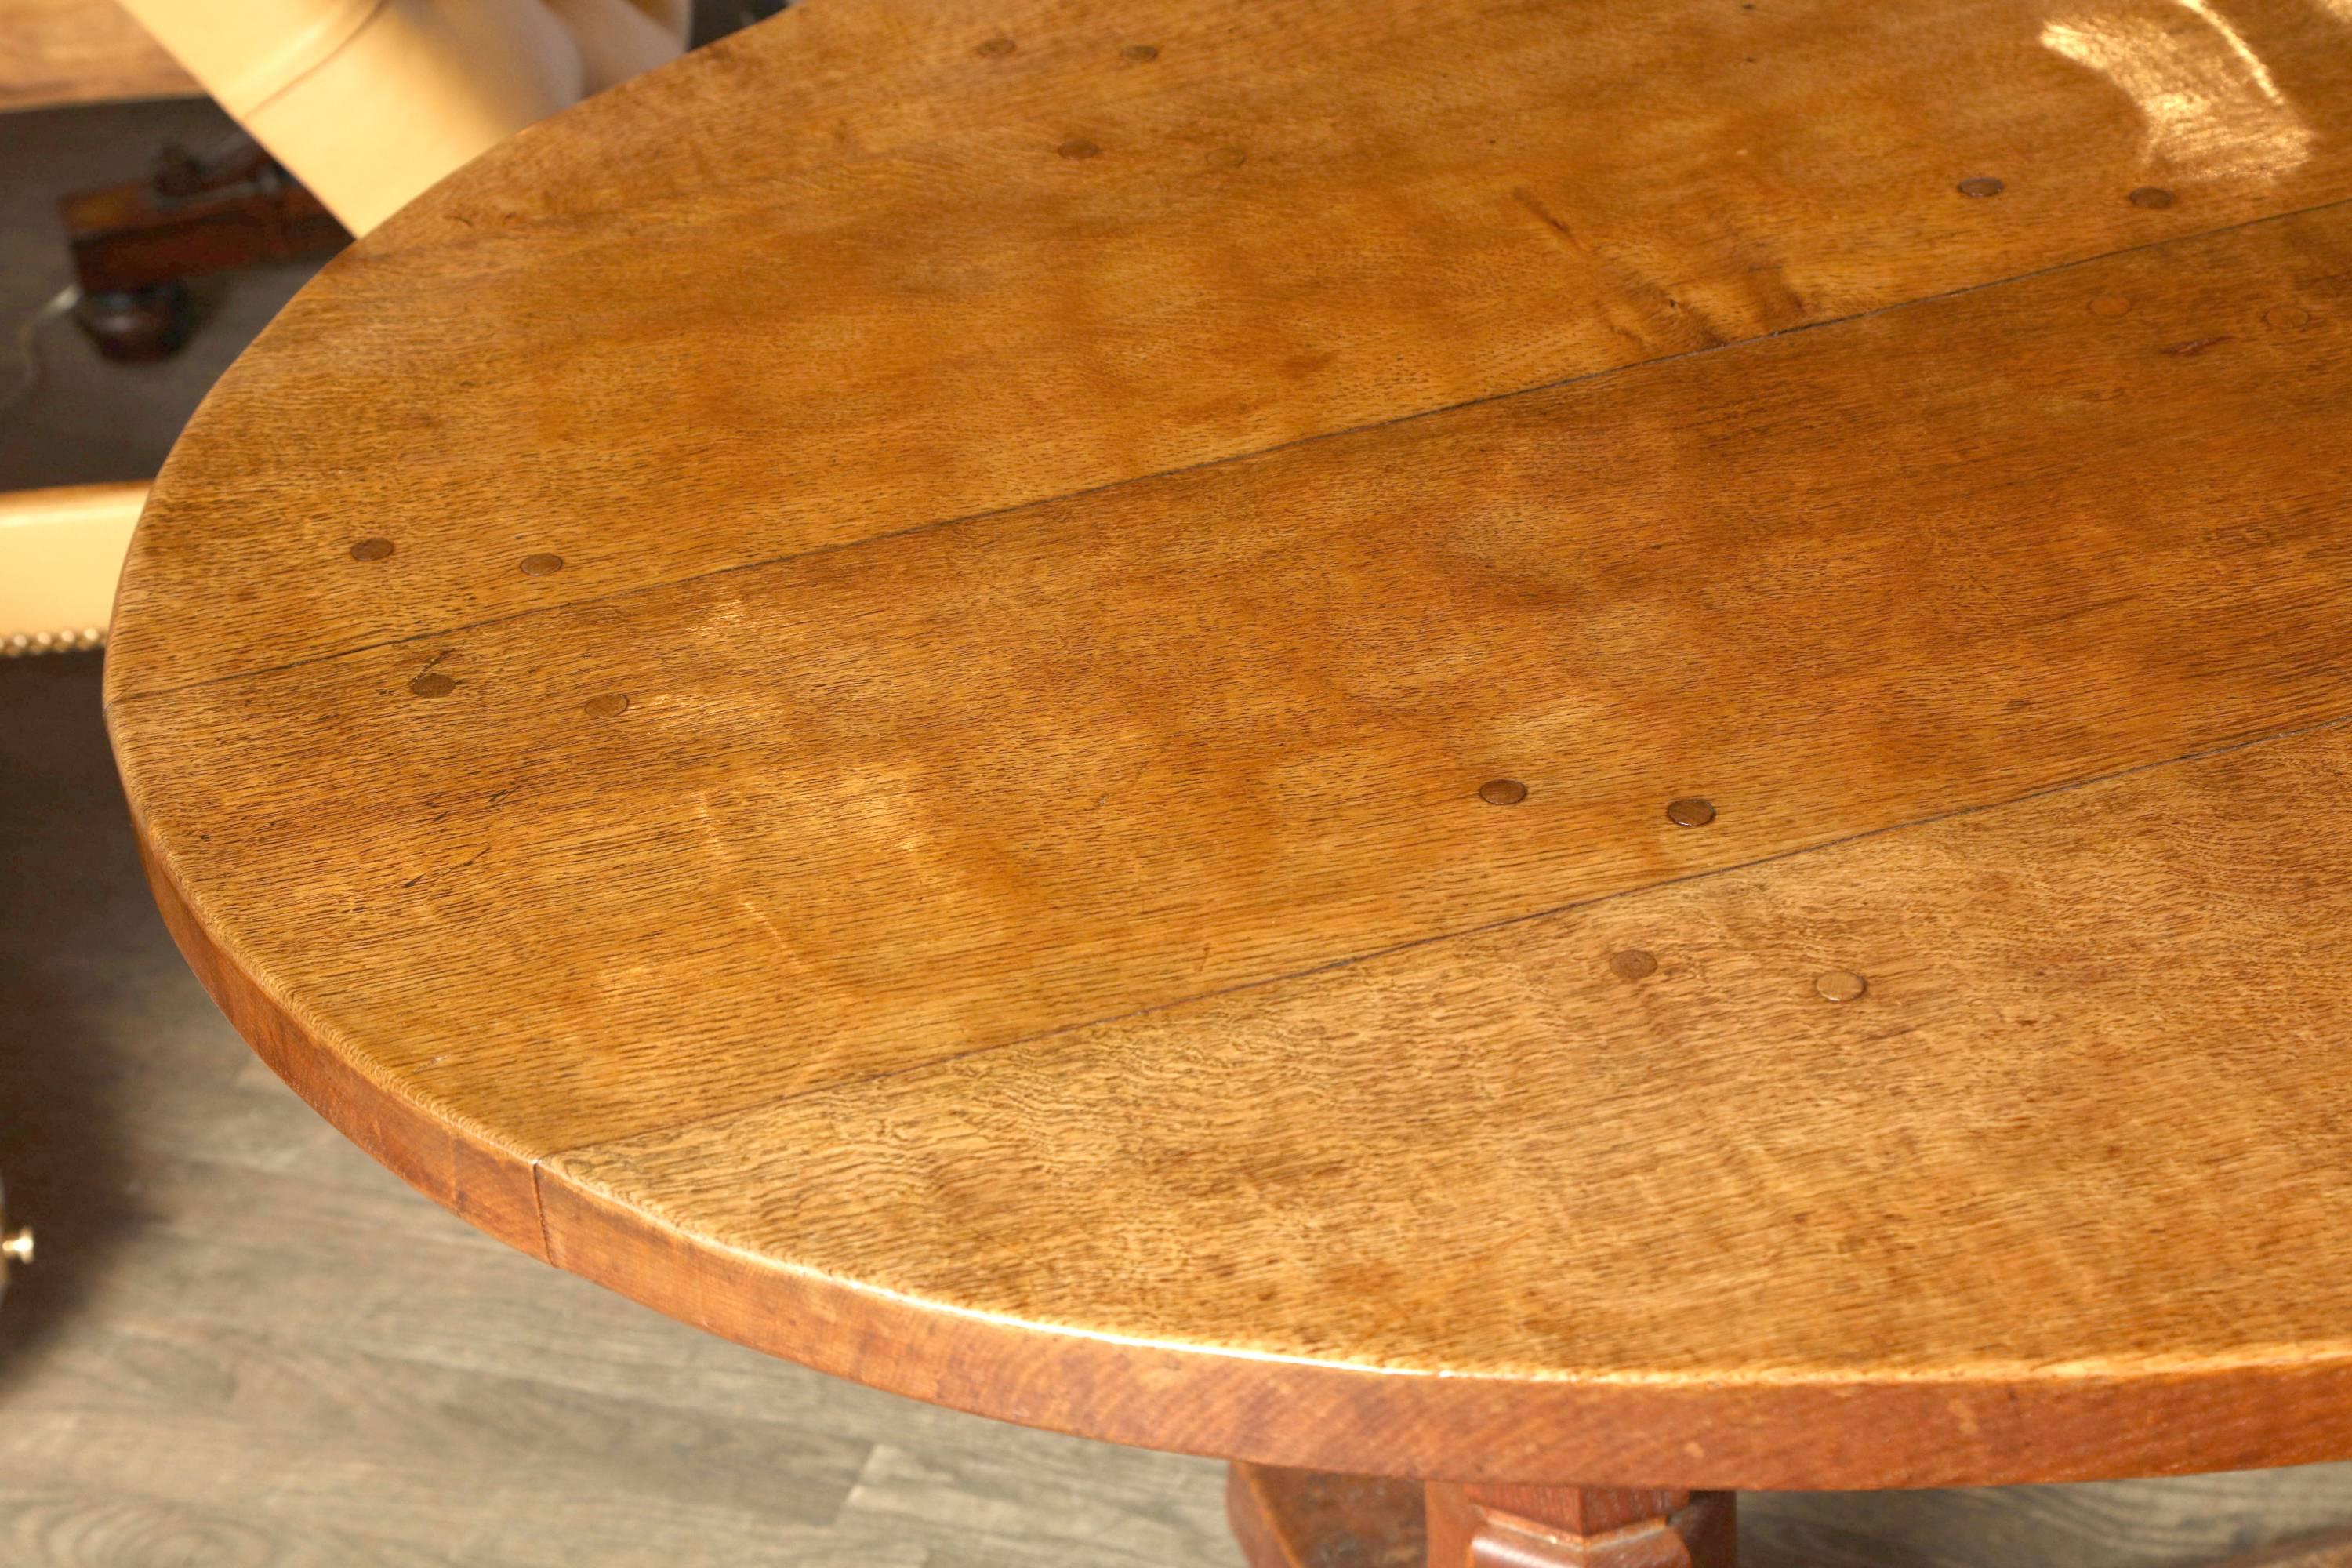 Handpicked by buyers at Ann-Morris Inc.

Unusual Oval shape “Mouseman” Table with great proportion between top and base.  This table is unusually strong due to thick oak stretcher and legs with the signature mouse carved into one leg. 